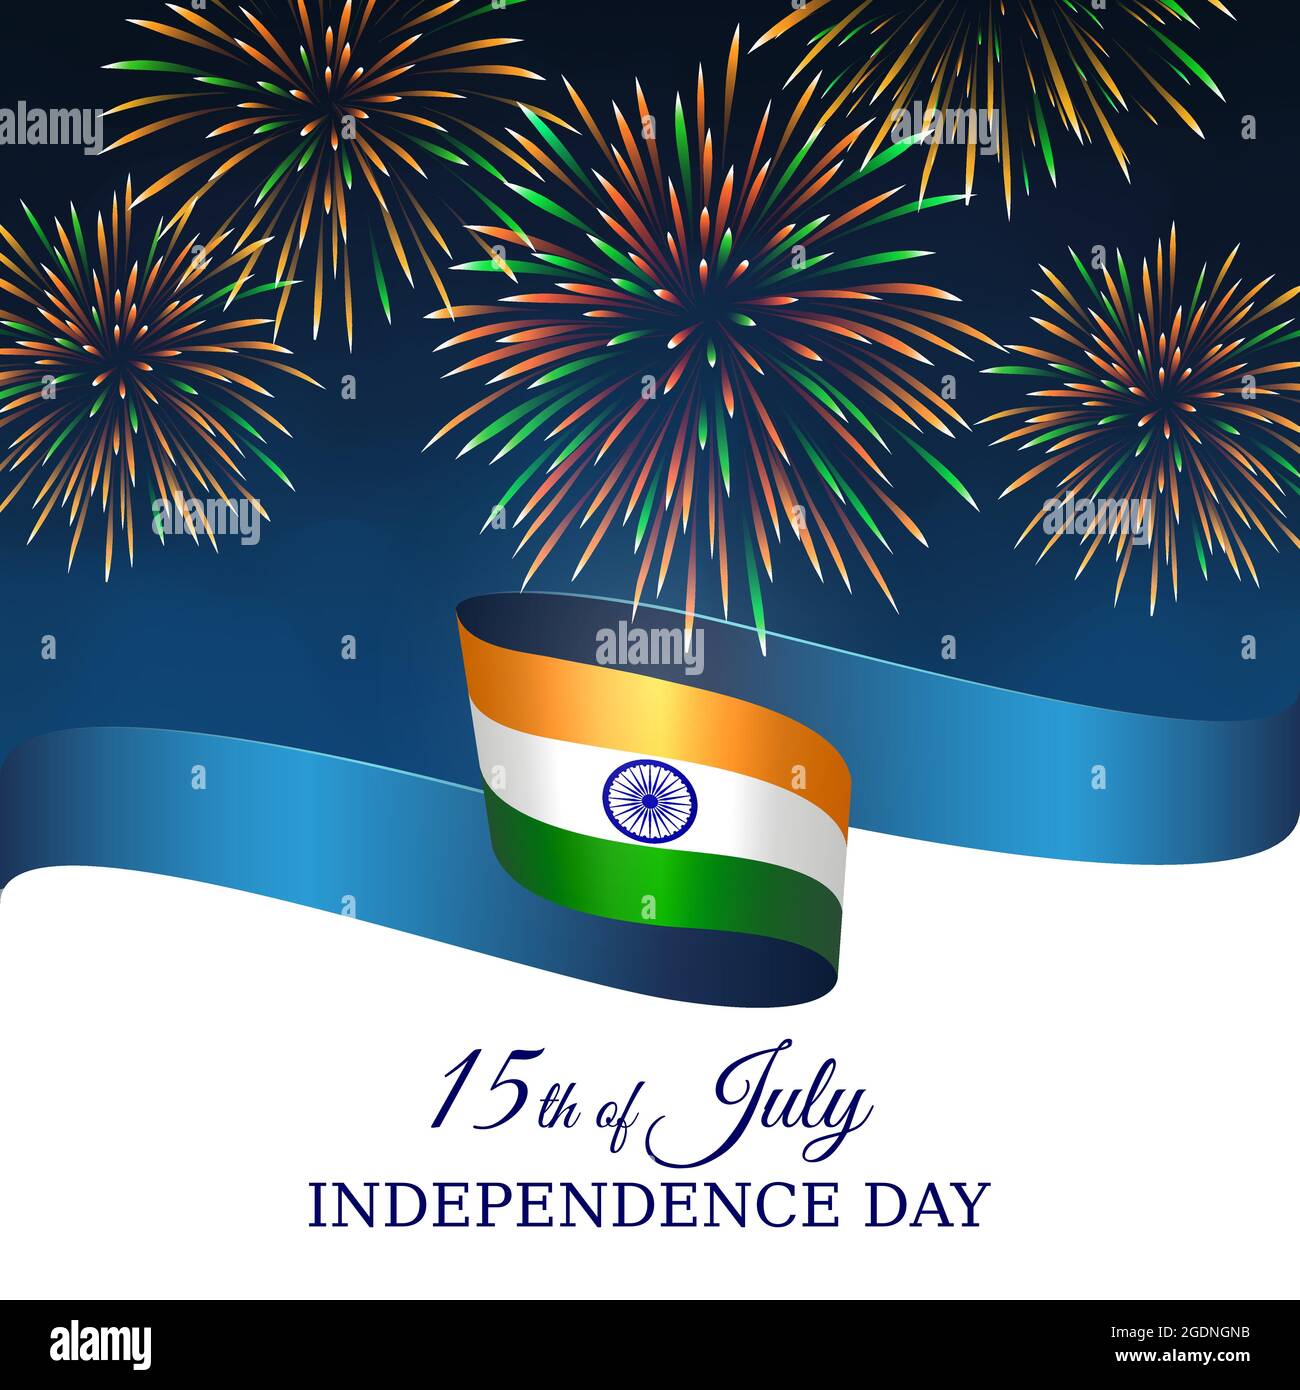 August 15, india independence day, vector template with indian flag and